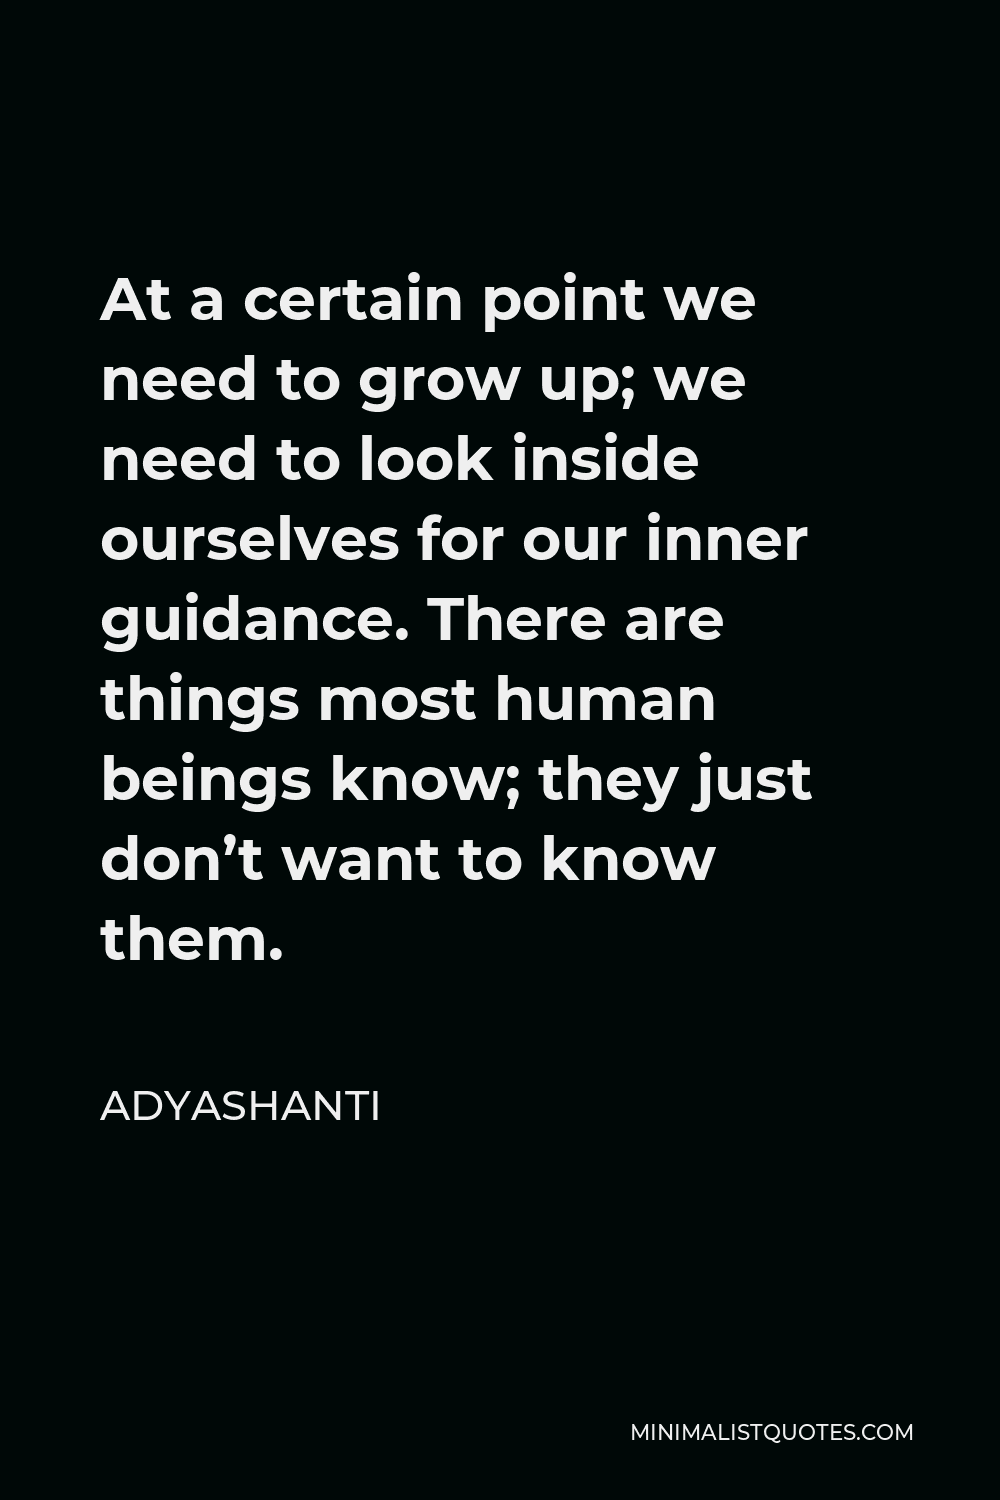 Adyashanti Quote - At a certain point we need to grow up; we need to look inside ourselves for our inner guidance. There are things most human beings know; they just don’t want to know them.